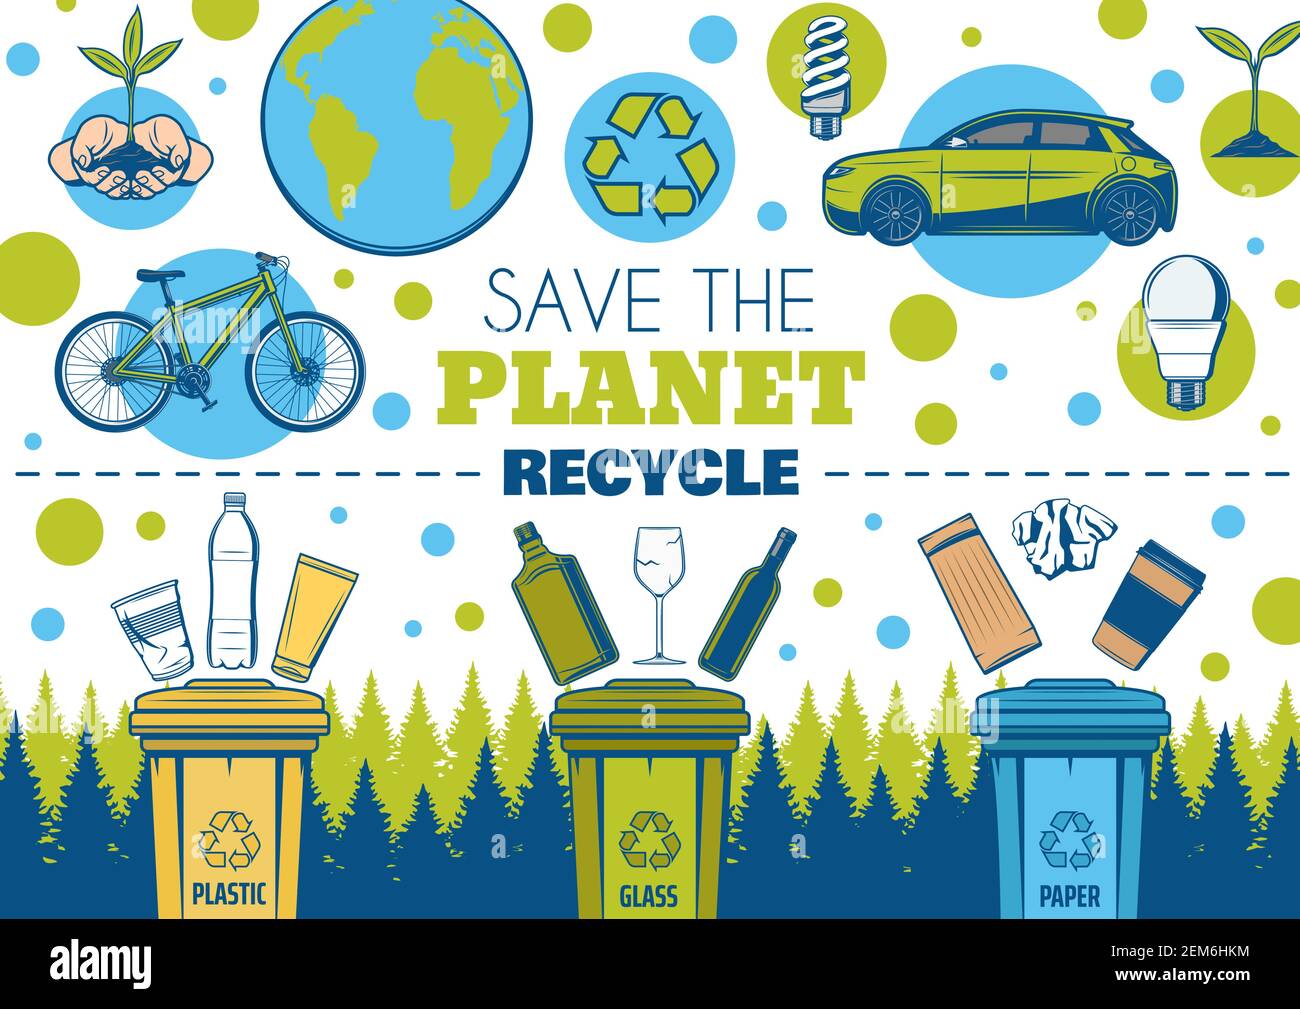 Save Earth and recycle vector design of ecology and environment ...